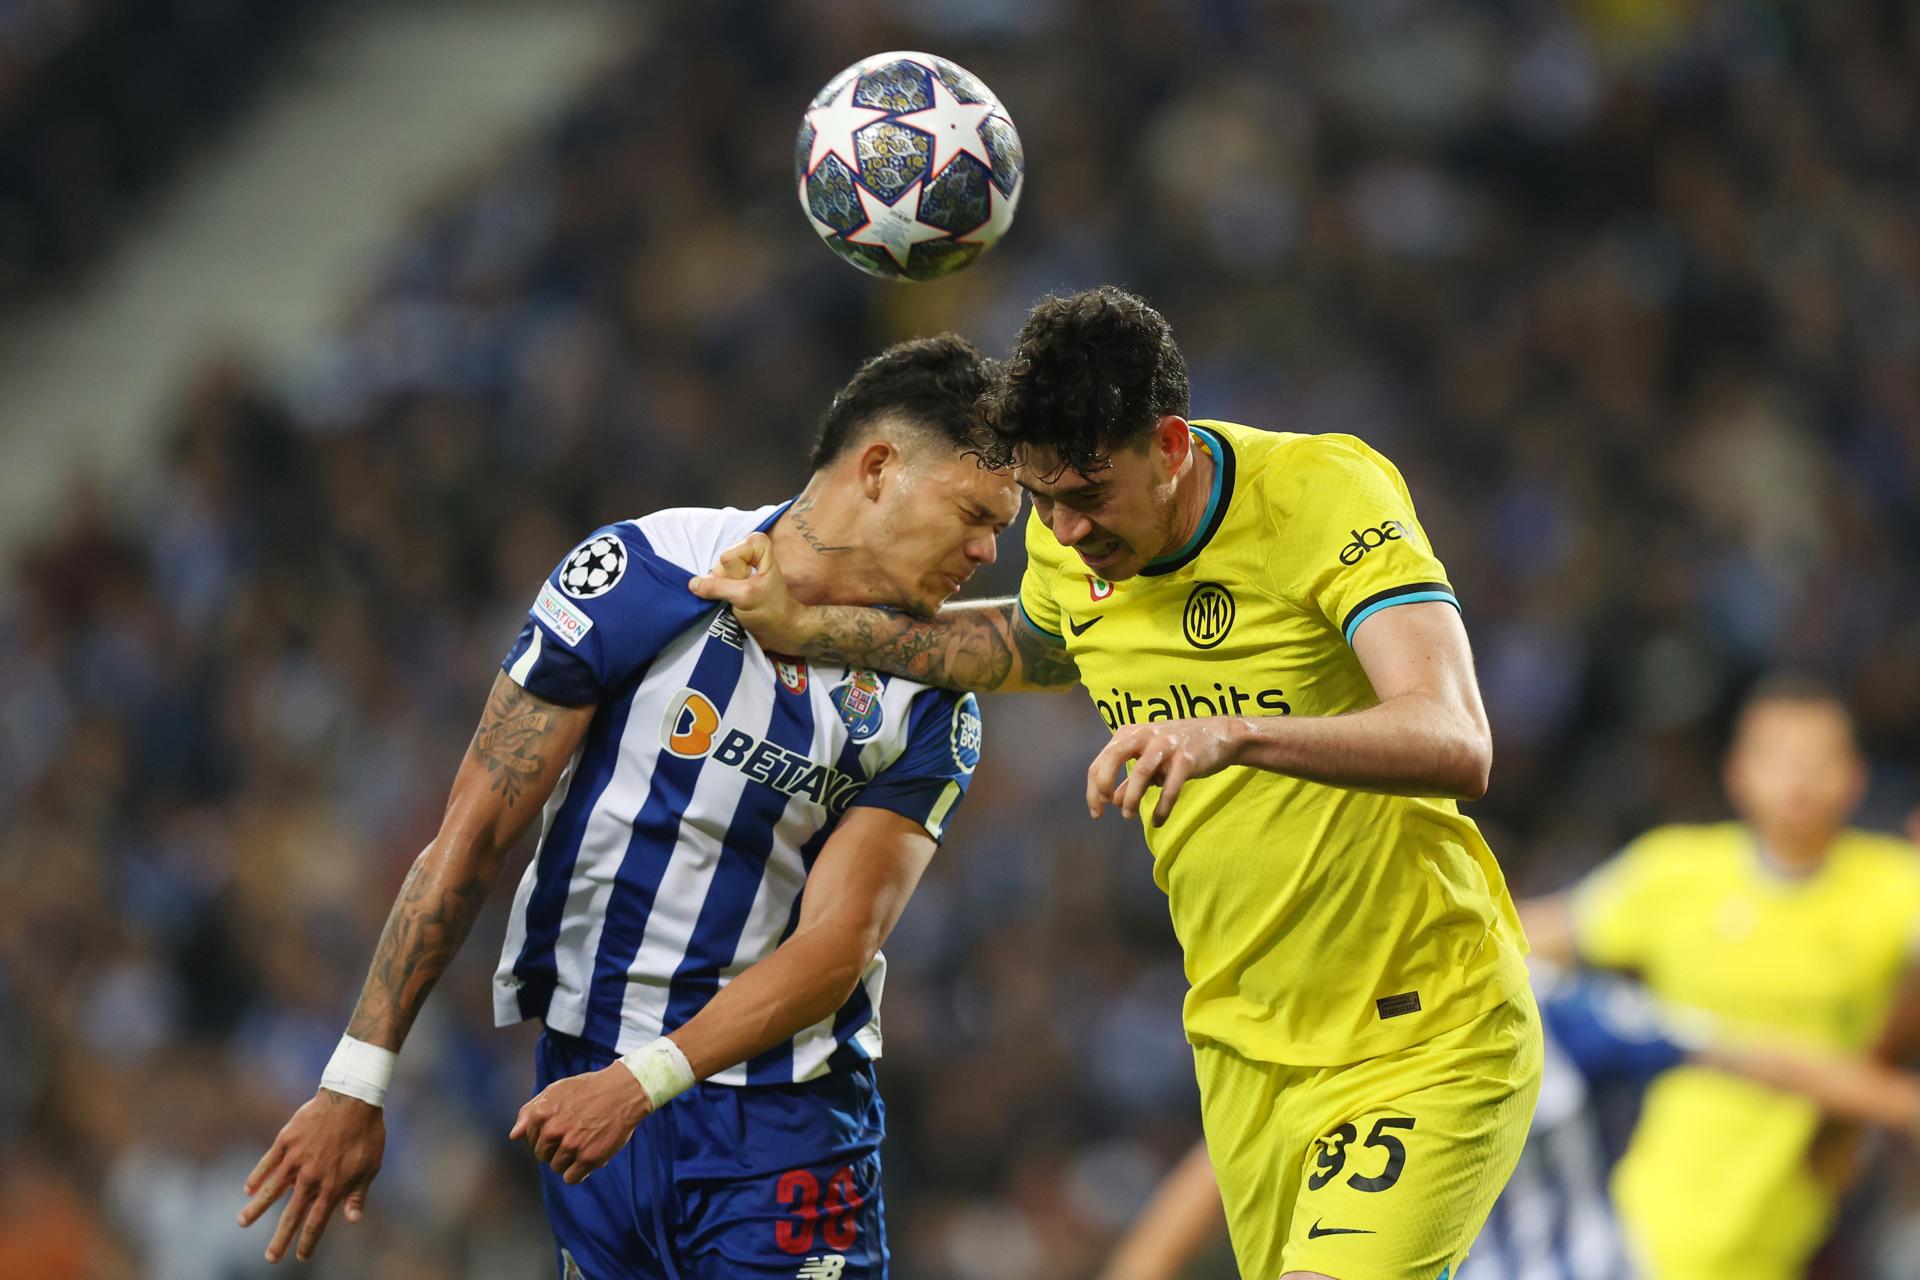 FC Porto's Evanilson (L) in action against Inter Milan's Alessandro Bastoni during the UEFA Champions League round of 16 second leg in Porto, Portugal, on 14 March 2023. EFE/EPA/JOSE COELHO
